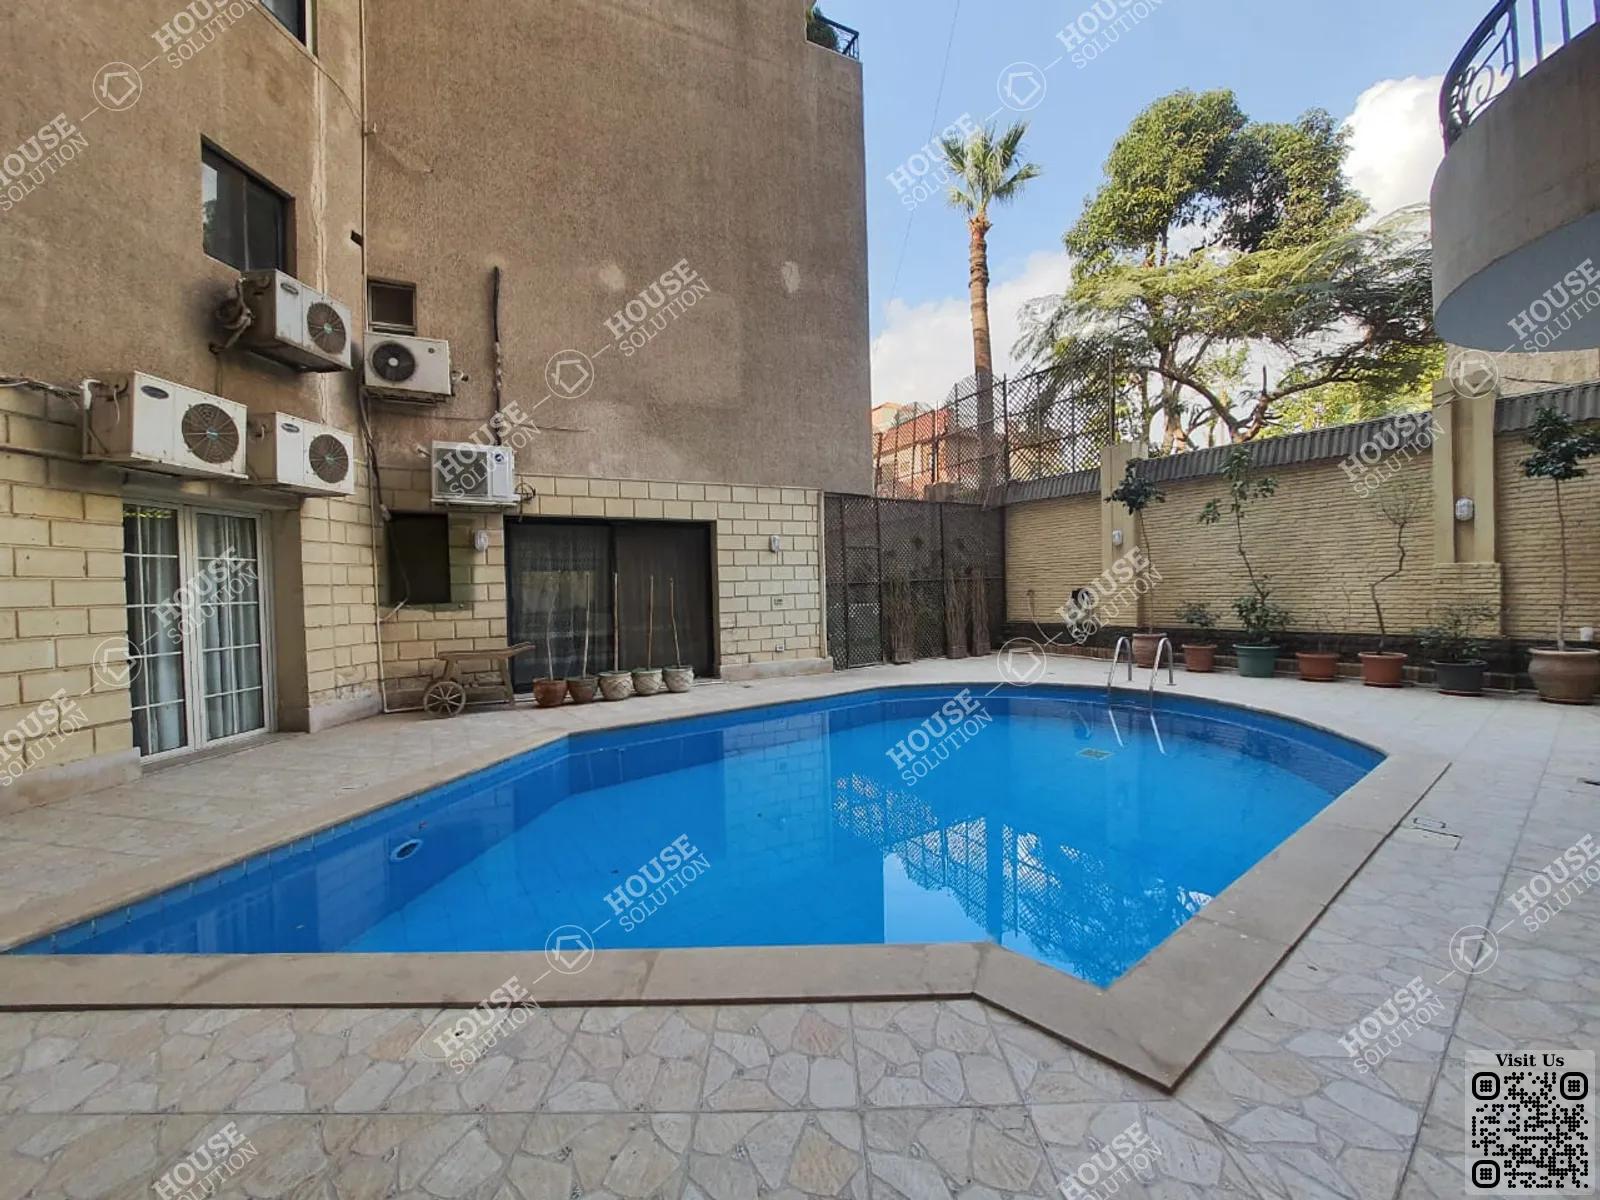 SHARED SWIMMING POOL  @ Apartments For Rent In Maadi Maadi Sarayat Area: 280 m² consists of 4 Bedrooms 3 Bathrooms Furnished 5 stars #5718-2